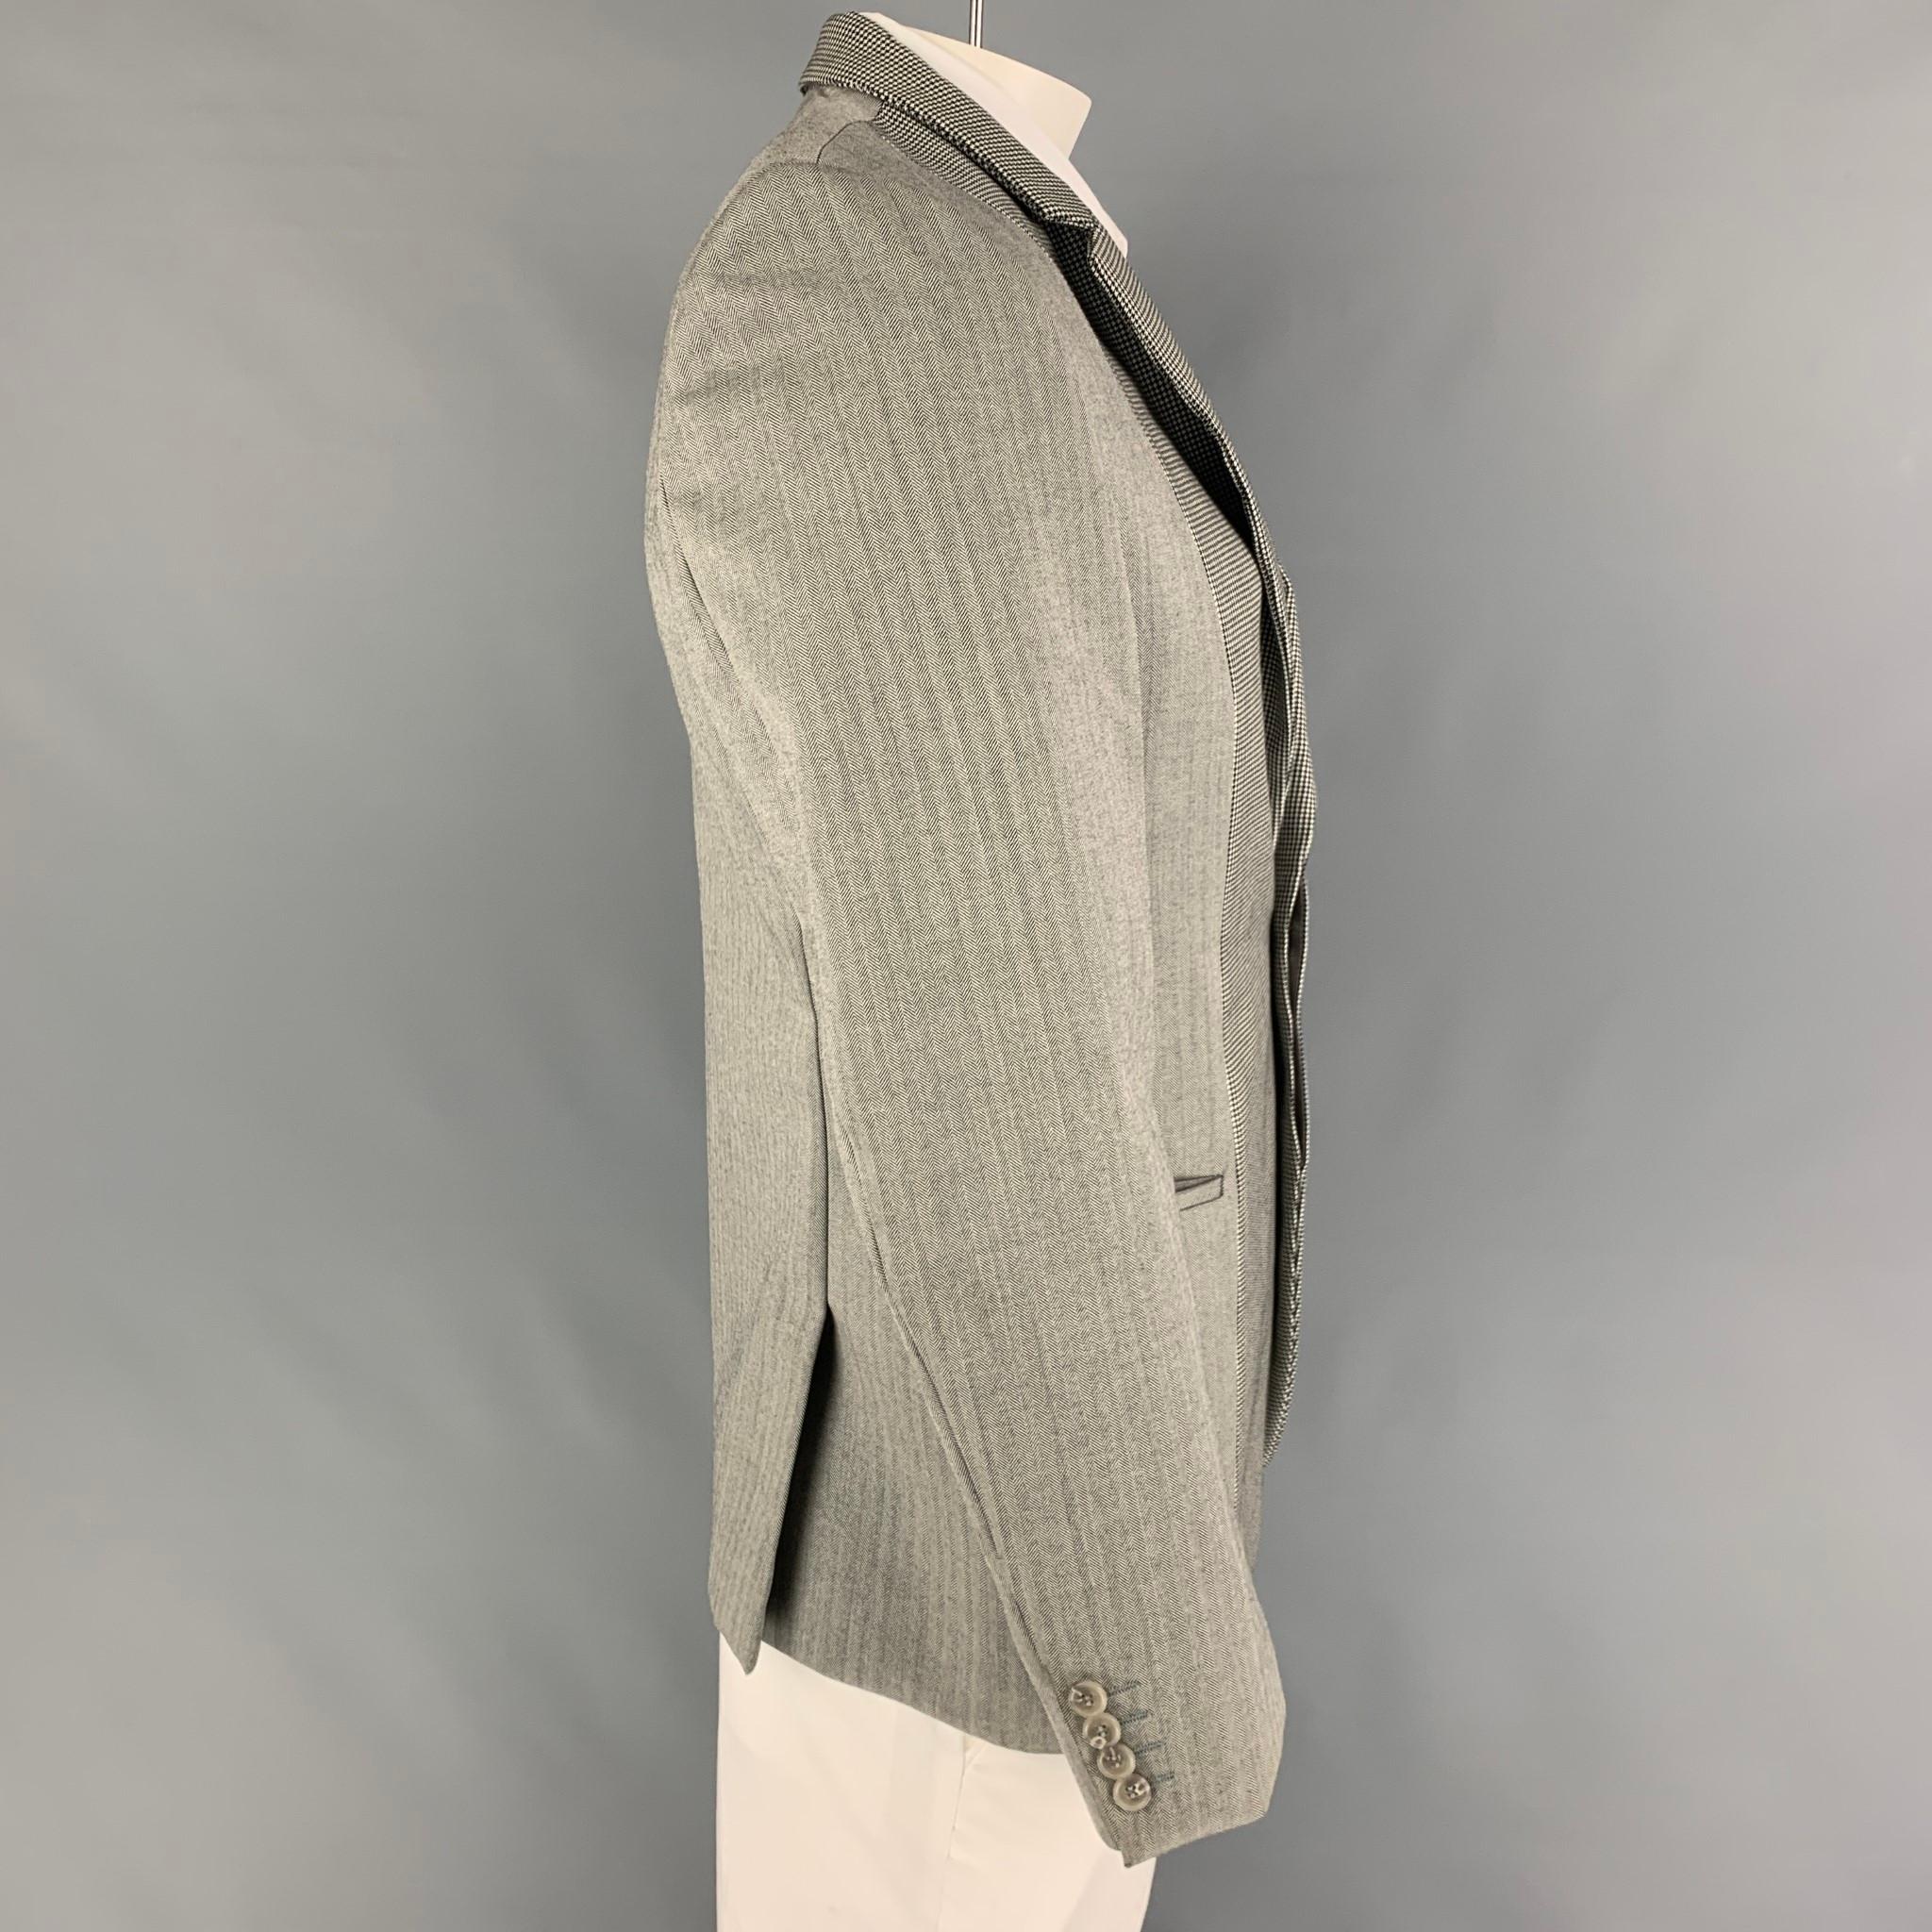 CALVIN KLEIN COLLECTION sport coat comes in a grey & black wool with a full liner featuring a notch lapel, slit pockets, double back vent, and a hidden double button closure. 

Very Good Pre-Owned Condition.
Marked: 50/40

Measurements:

Shoulder: